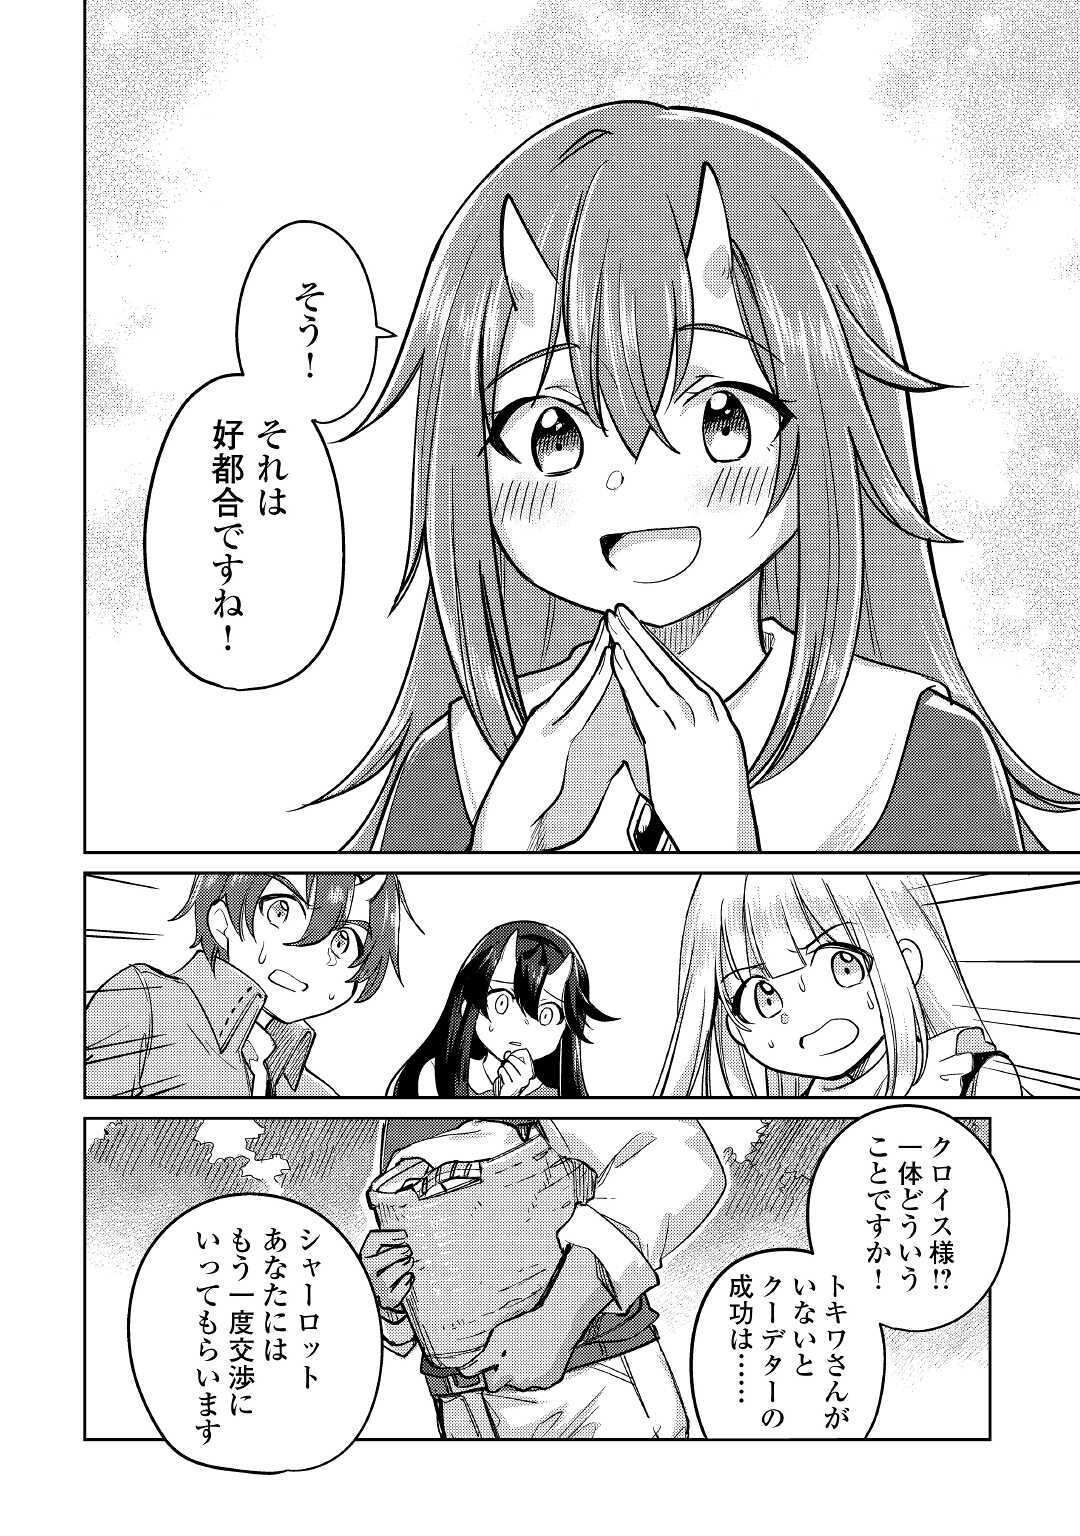 The Former Structural Researcher’s Story of Otherworldly Adventure 第32話 - Page 12